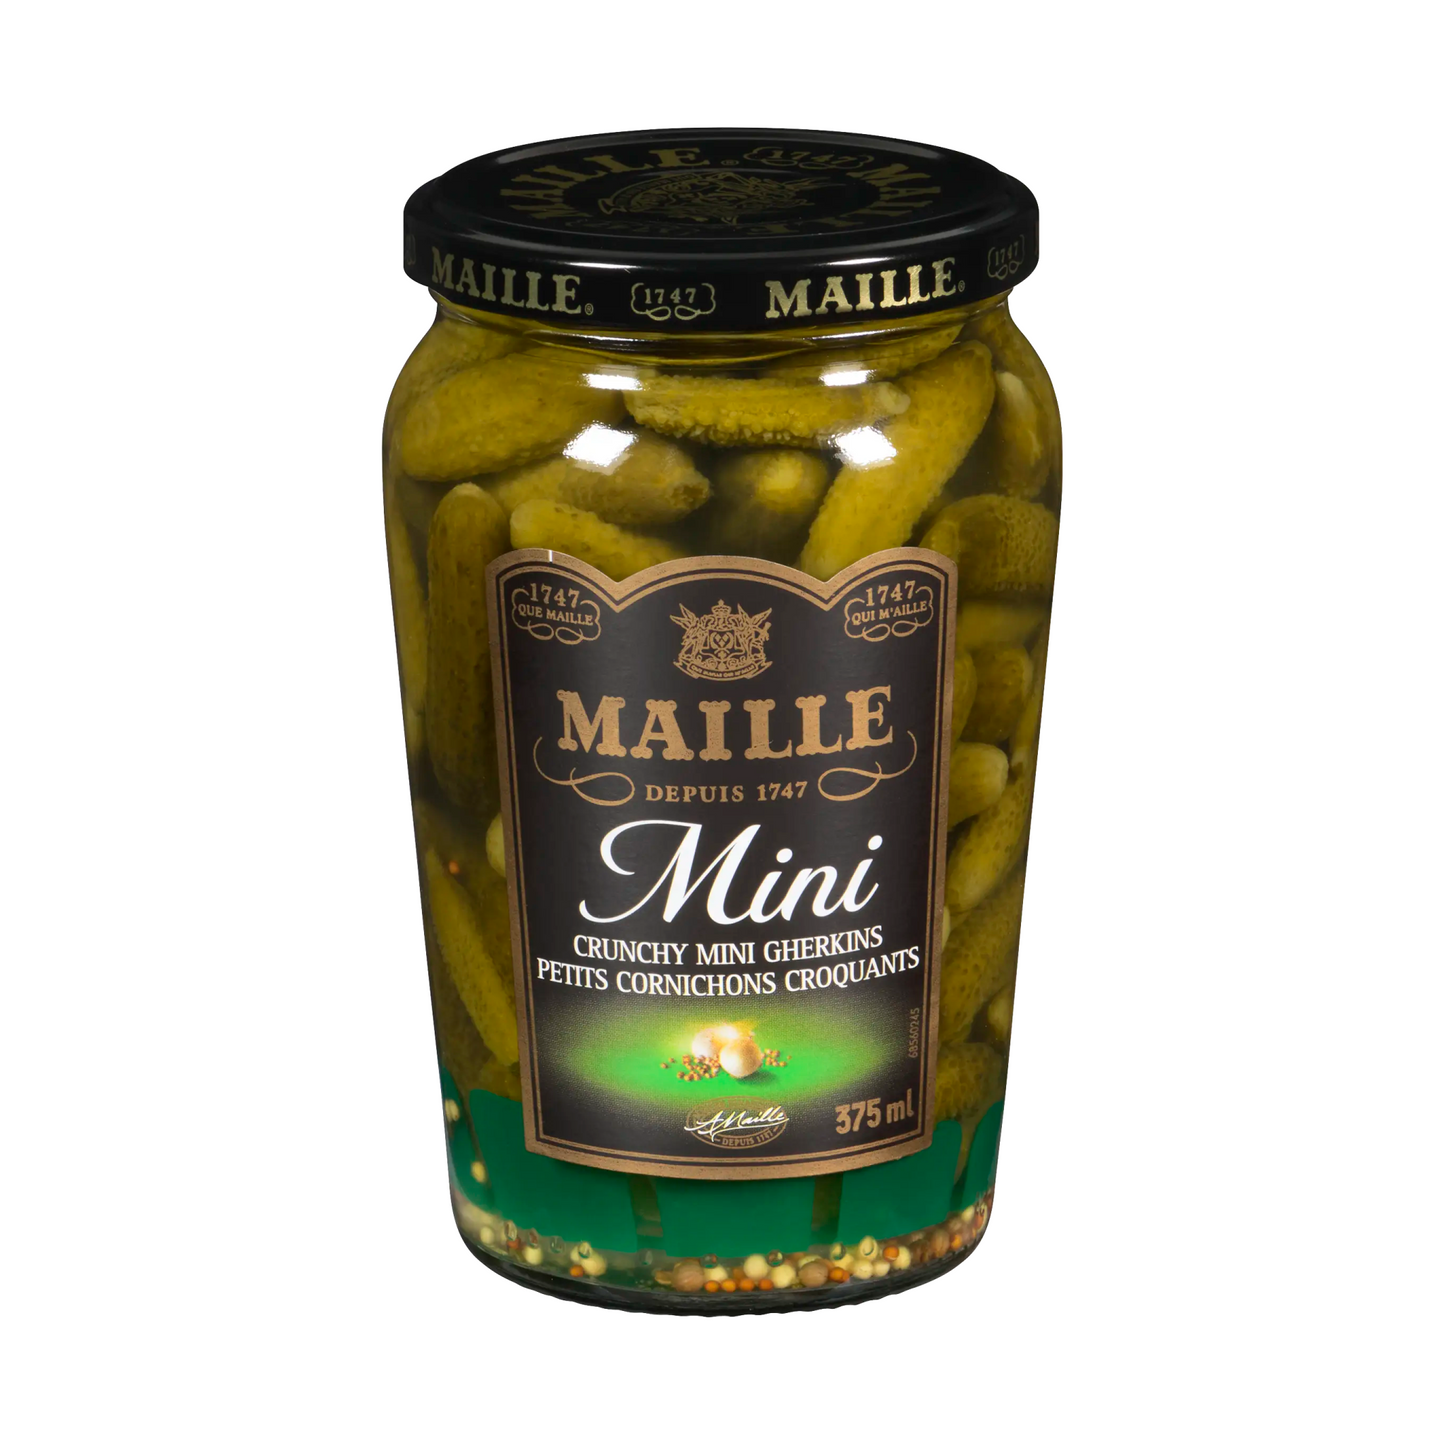 Maille Extra Fine Sweet and Sour Cornichons 375ml